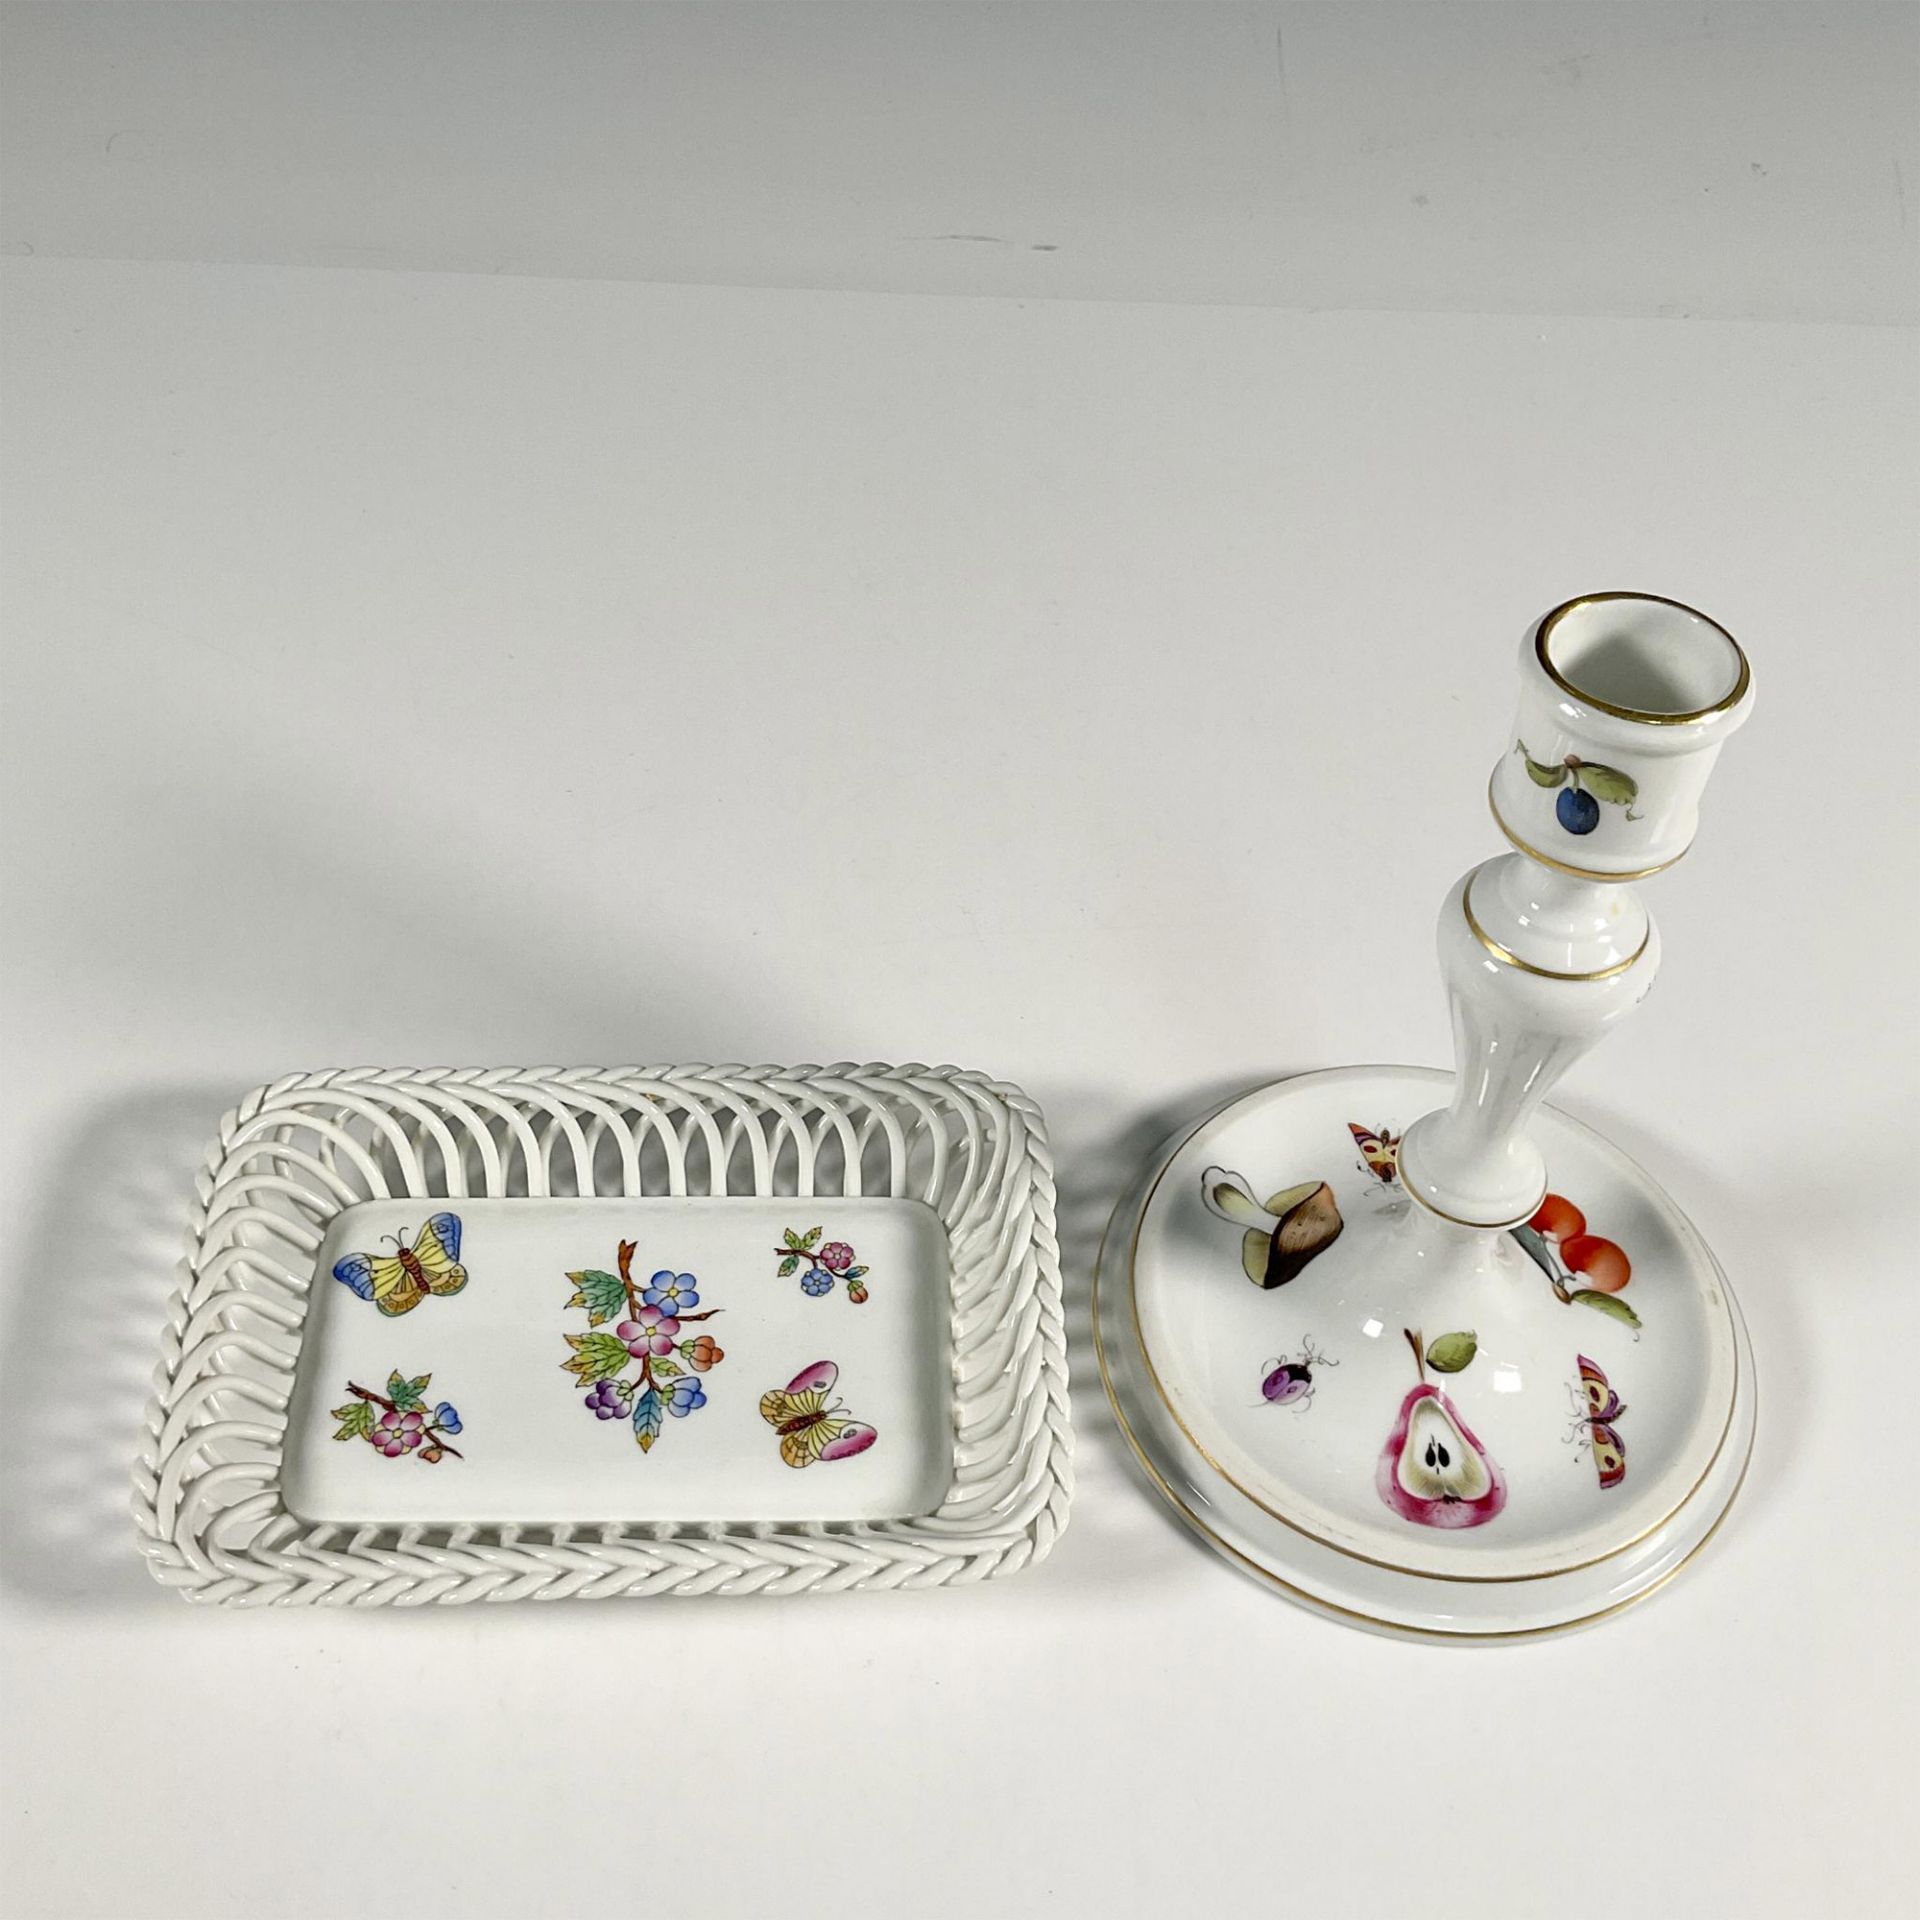 2pc Herend Porcelain Tray and Candlestick Holder - Image 2 of 3